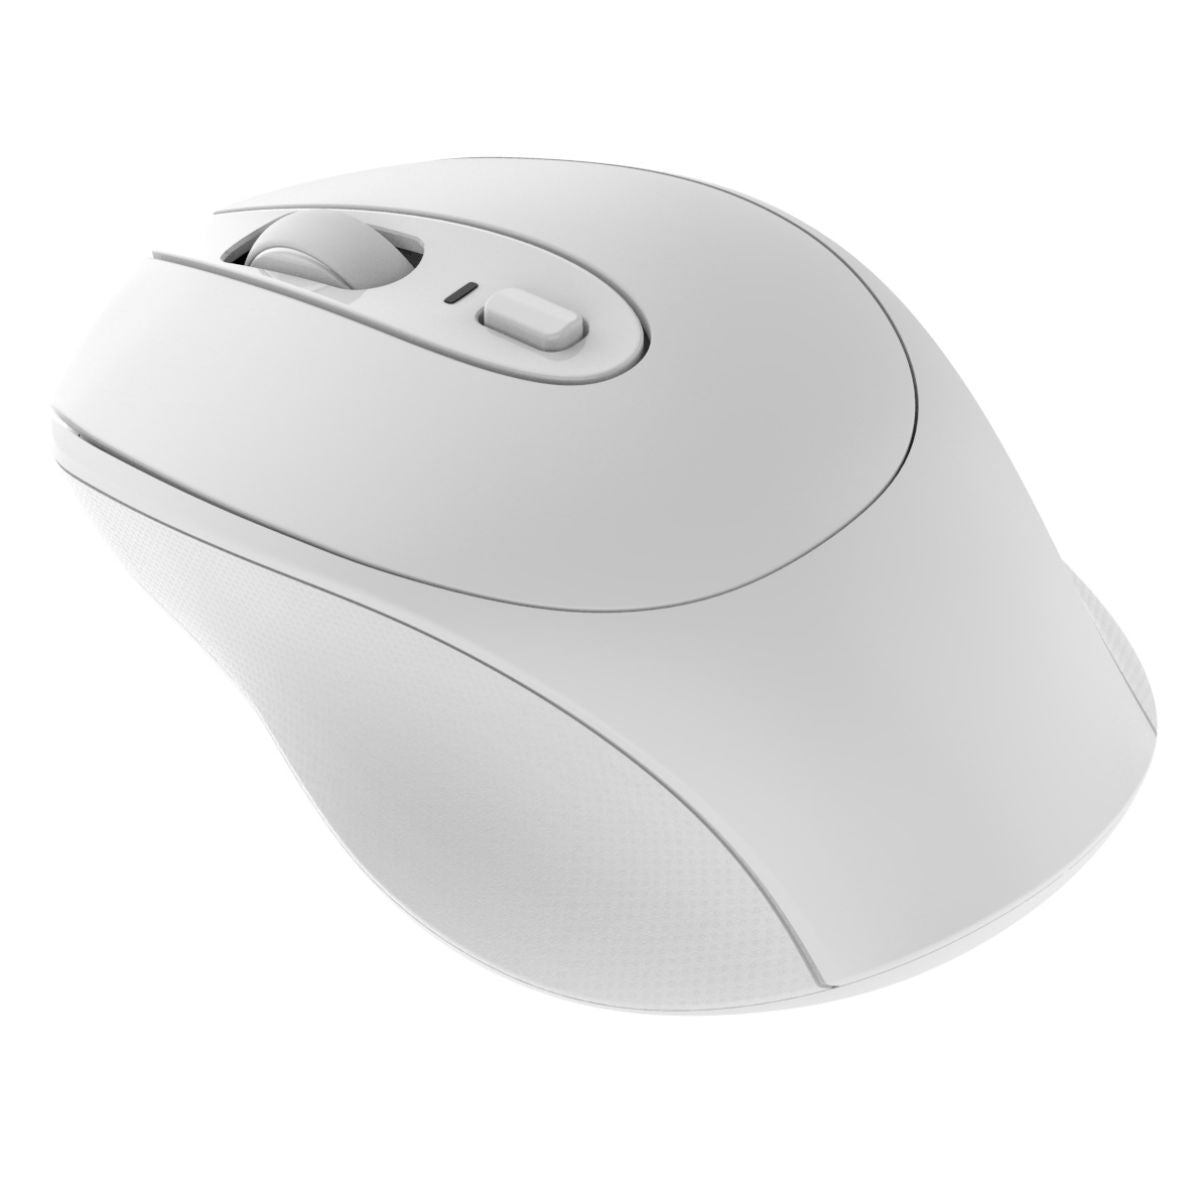 INDENA G222D Dual Mode Wireless Mouse White-Hugmie